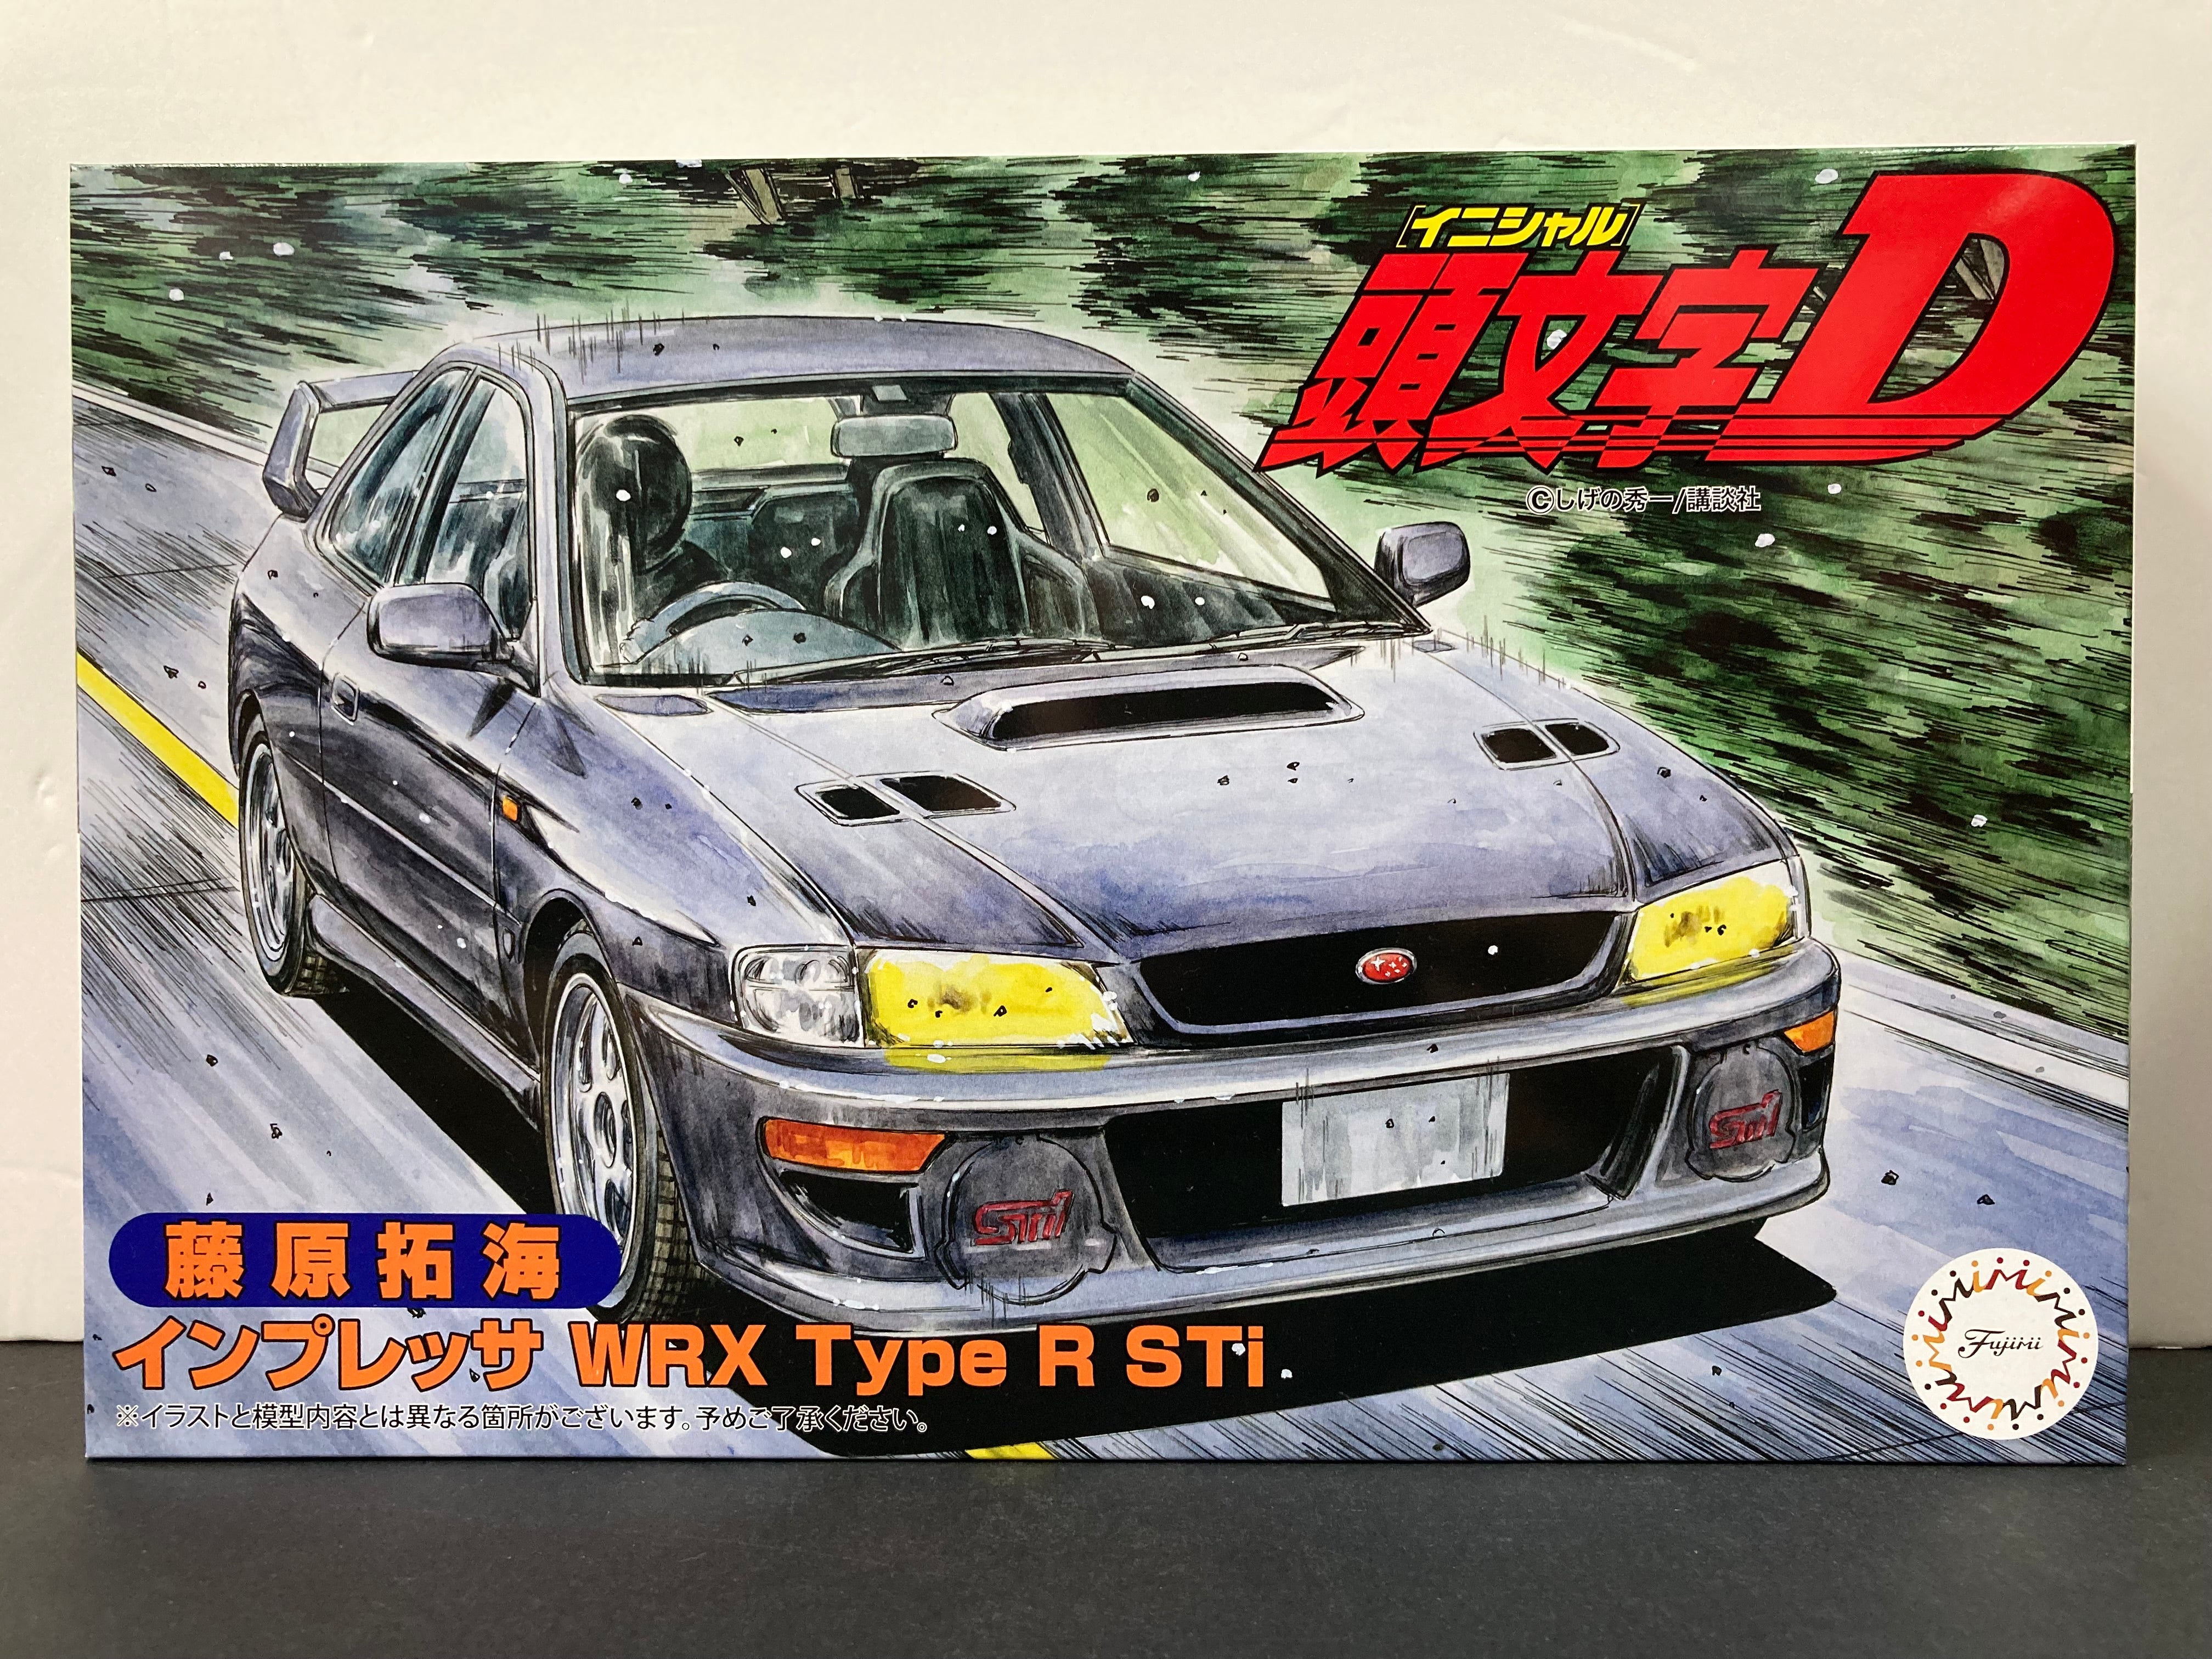 GC8 finally shows up in Initial D anime series